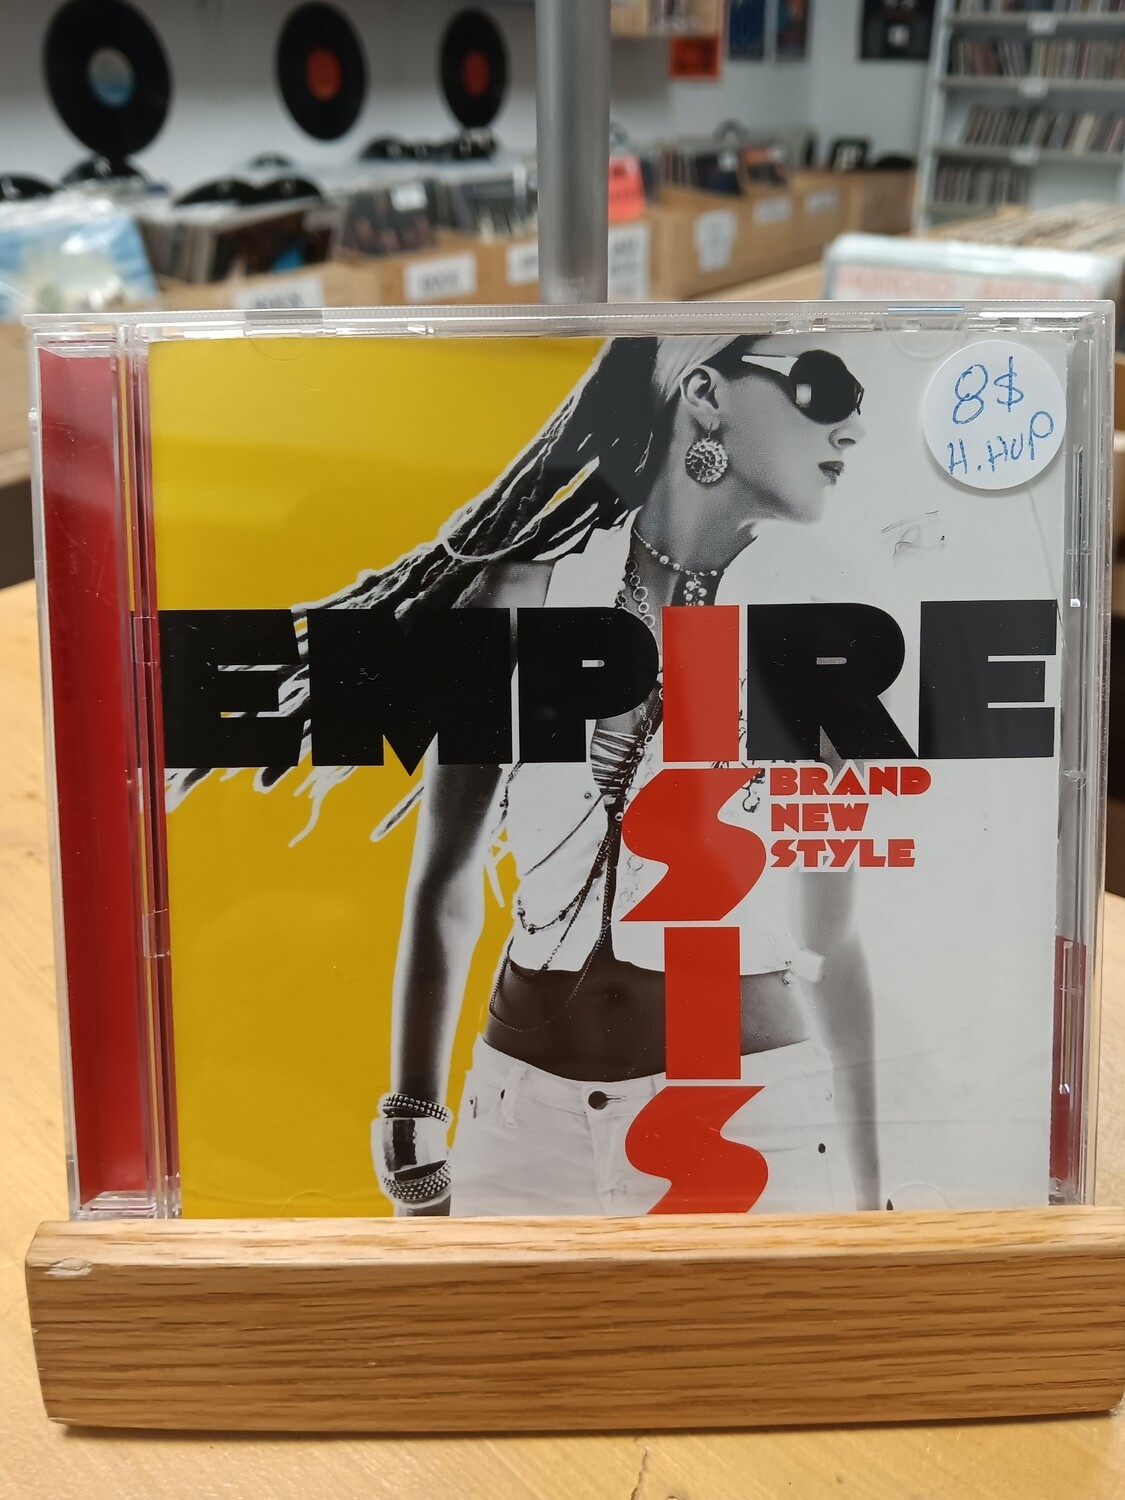 Empire Isis - Brand new style (CD)